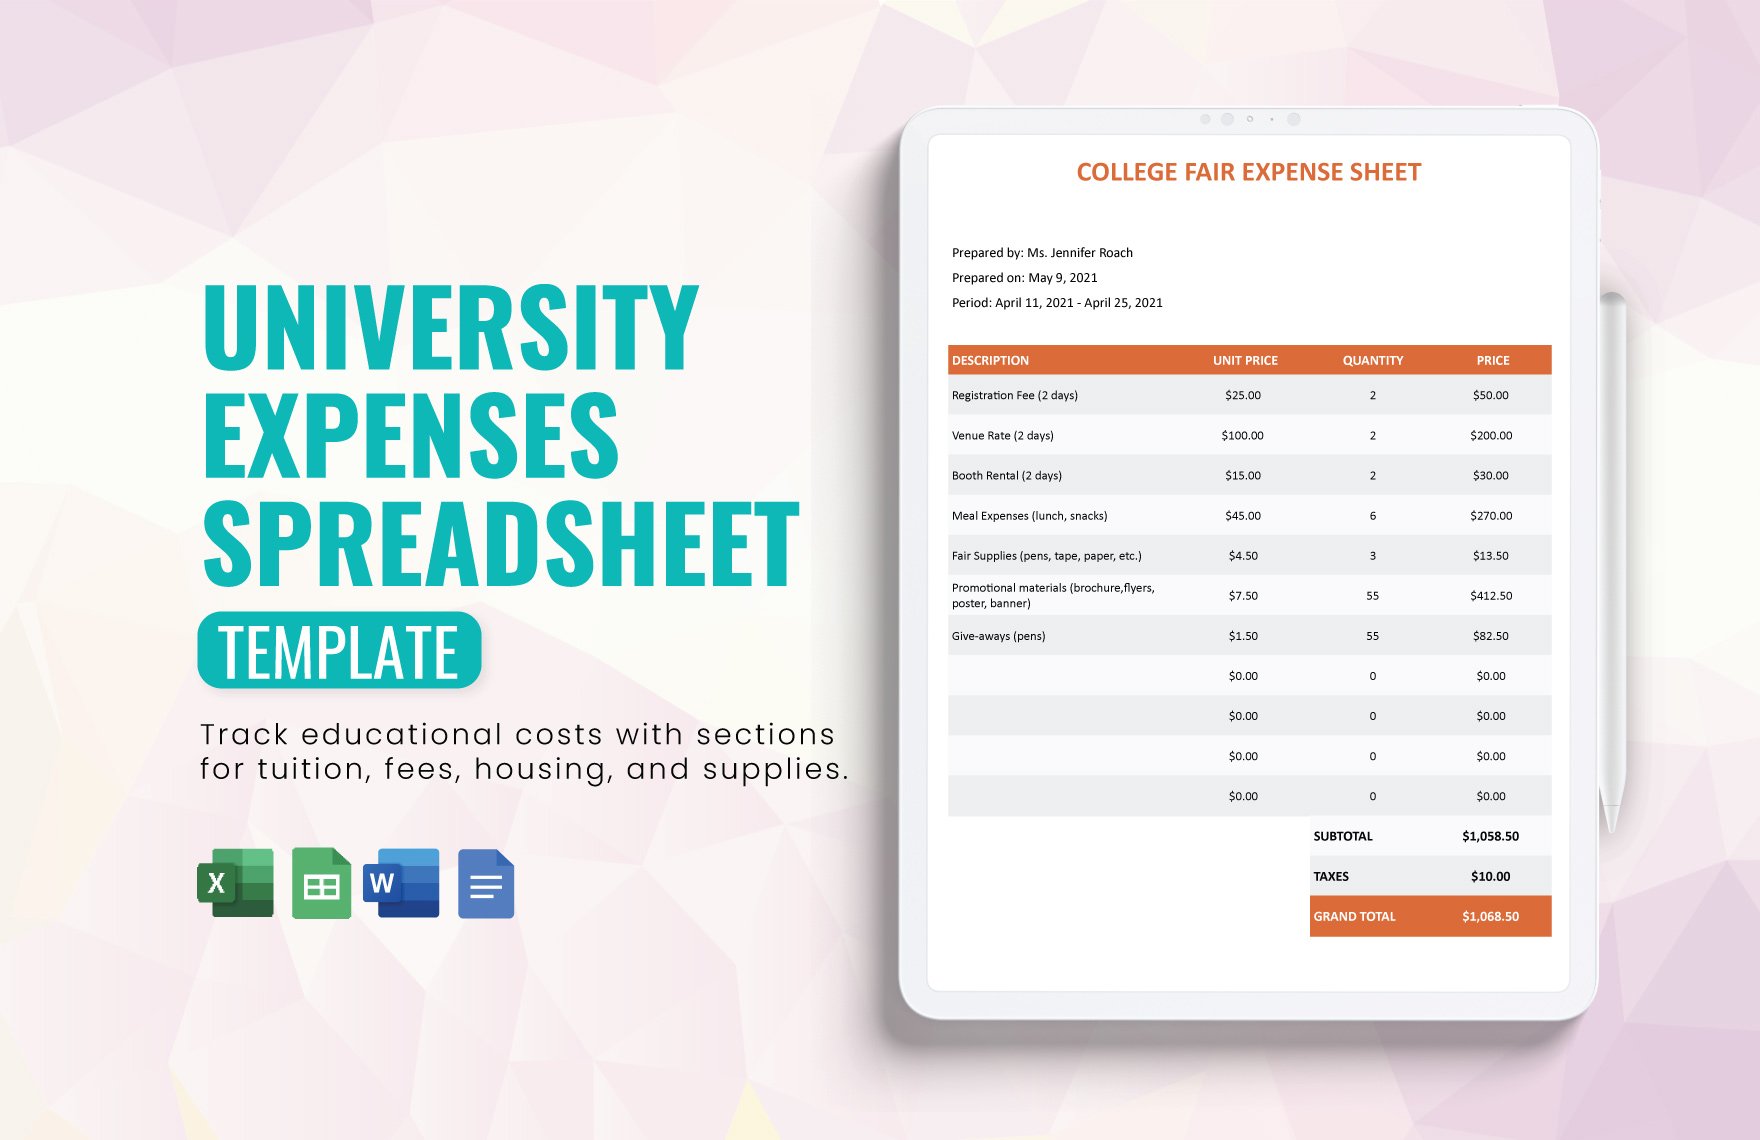 University Expenses Spreadsheet Template in Word, Google Docs, Excel, Google Sheets